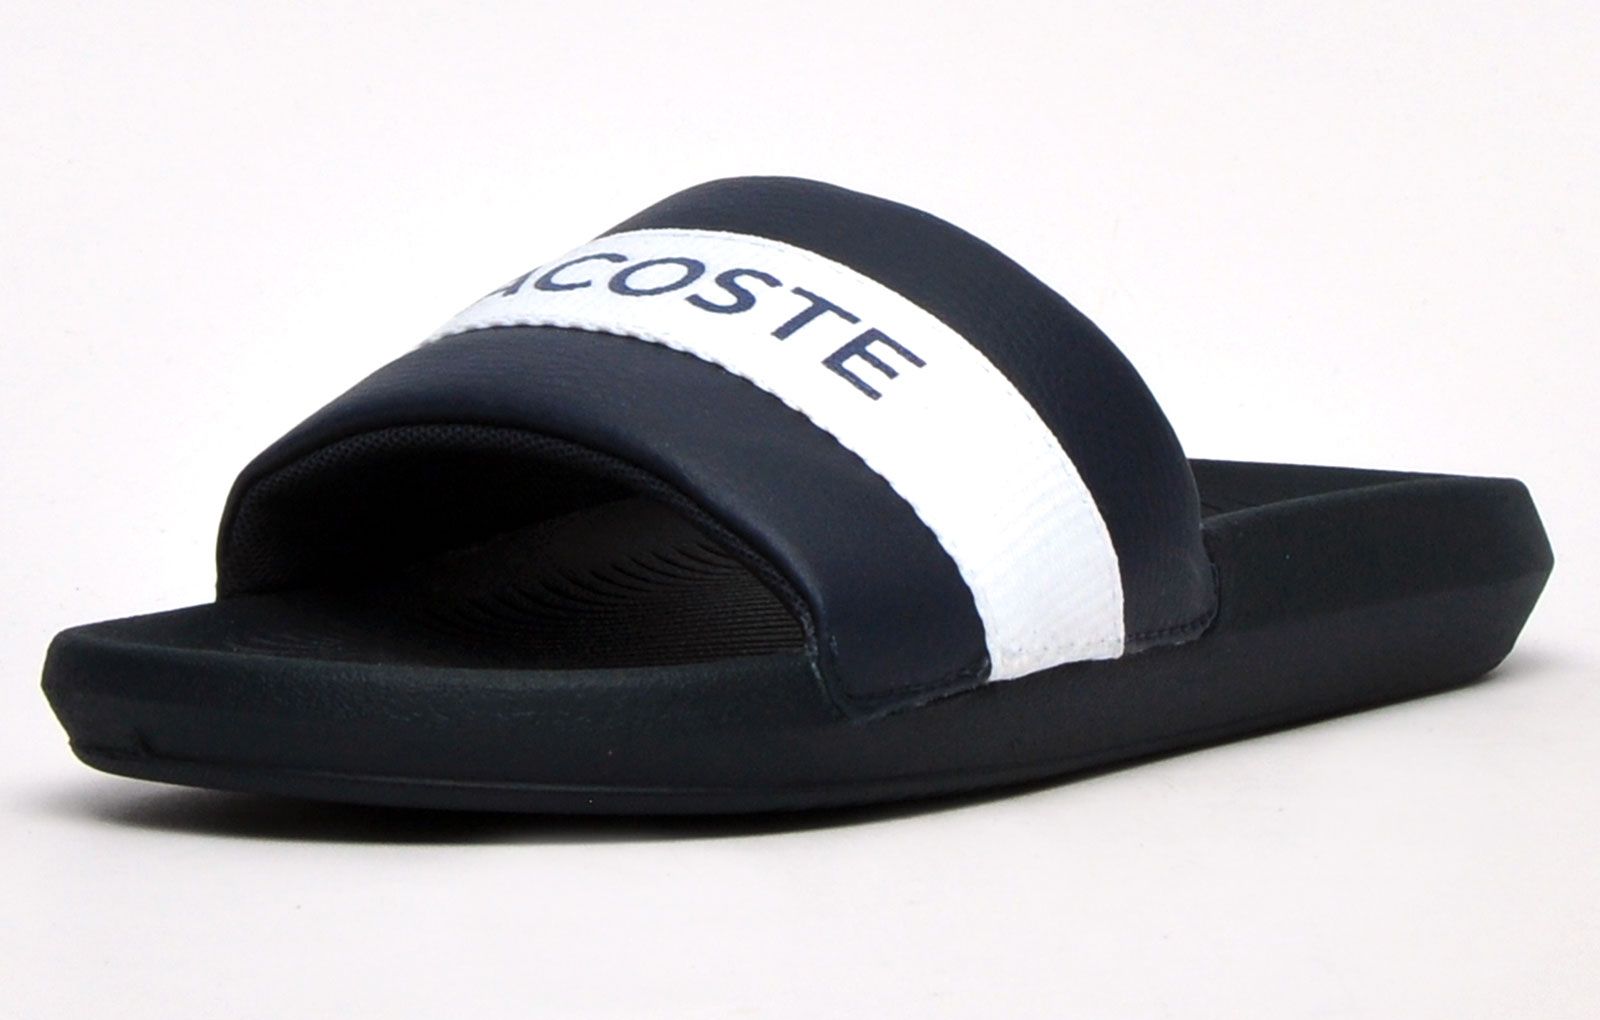 Step into on trend summer style with these mensCroco Slides from Lacoste. In a classic colourway, these designer sandals are delivered in a smooth synthetic upper with textile band stripe detailing across the forefoot foot strap. The super comfy moulded footbed delivers the perfect fit and feel while the grippy outsole will keep you sure and safe around the pool or in the shower. These designer slides are finished with eye catching Lacoste branding throughout just in case you want a sign of approval that youre wearing cool on-trend style this summer season 
 
 - Synthetic comfort upper
 - Comfort moulded footbed
 - Single strap construction
 - Grippy outsole
 - Slip on wear
 - Iconic Lacoste branding throughout
 Please Note: These slides are supplied poly bagged (without box)
 These Lacoste Slides are sold as B grades which means there may be some very slight cosmetic issues on the shoe and they come in a poly bag. There could be occasional issues with wrong swing tags being allocated to wrong shoes by Lacoste themselves which could result in some size confusion but you must take the size IN THE SHOE as the size that the shoe actually is ( not what is on the tag ). We have checked most of the shoes and in our opinion,all are practically perfect without any blemishes on them at all and in essence if the shoes did not have the letter B denoted on the swing tag you would presume these were perfect shoes. All shoes are guaranteed against fair wear and tear and offer a substantial saving against the normal high street price. The overall function or performance of the shoe will not be affected by any minor cosmetic issues. B Grades are original authentic products released by the brand manufacturer with their approval at greatly reduced prices. If you are unhappy with your purchase, we will be more than happy to take the shoes back from you and issue a full refund